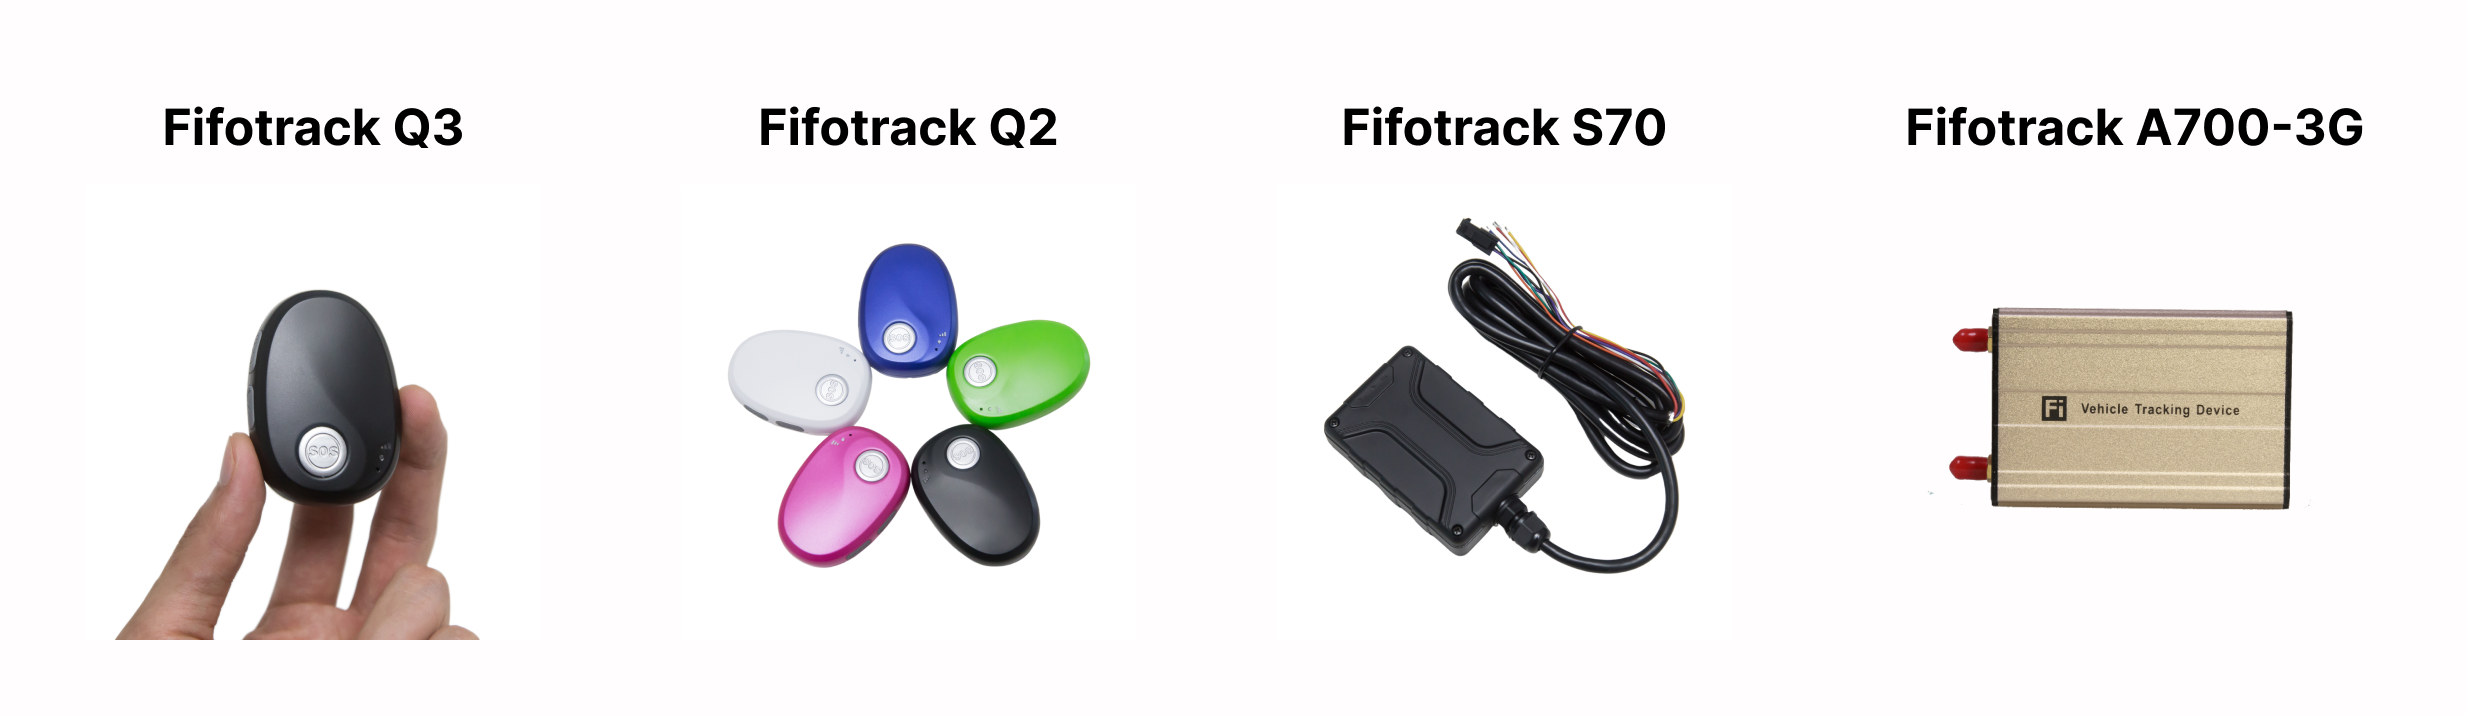 Fifotrack and Gps Trace